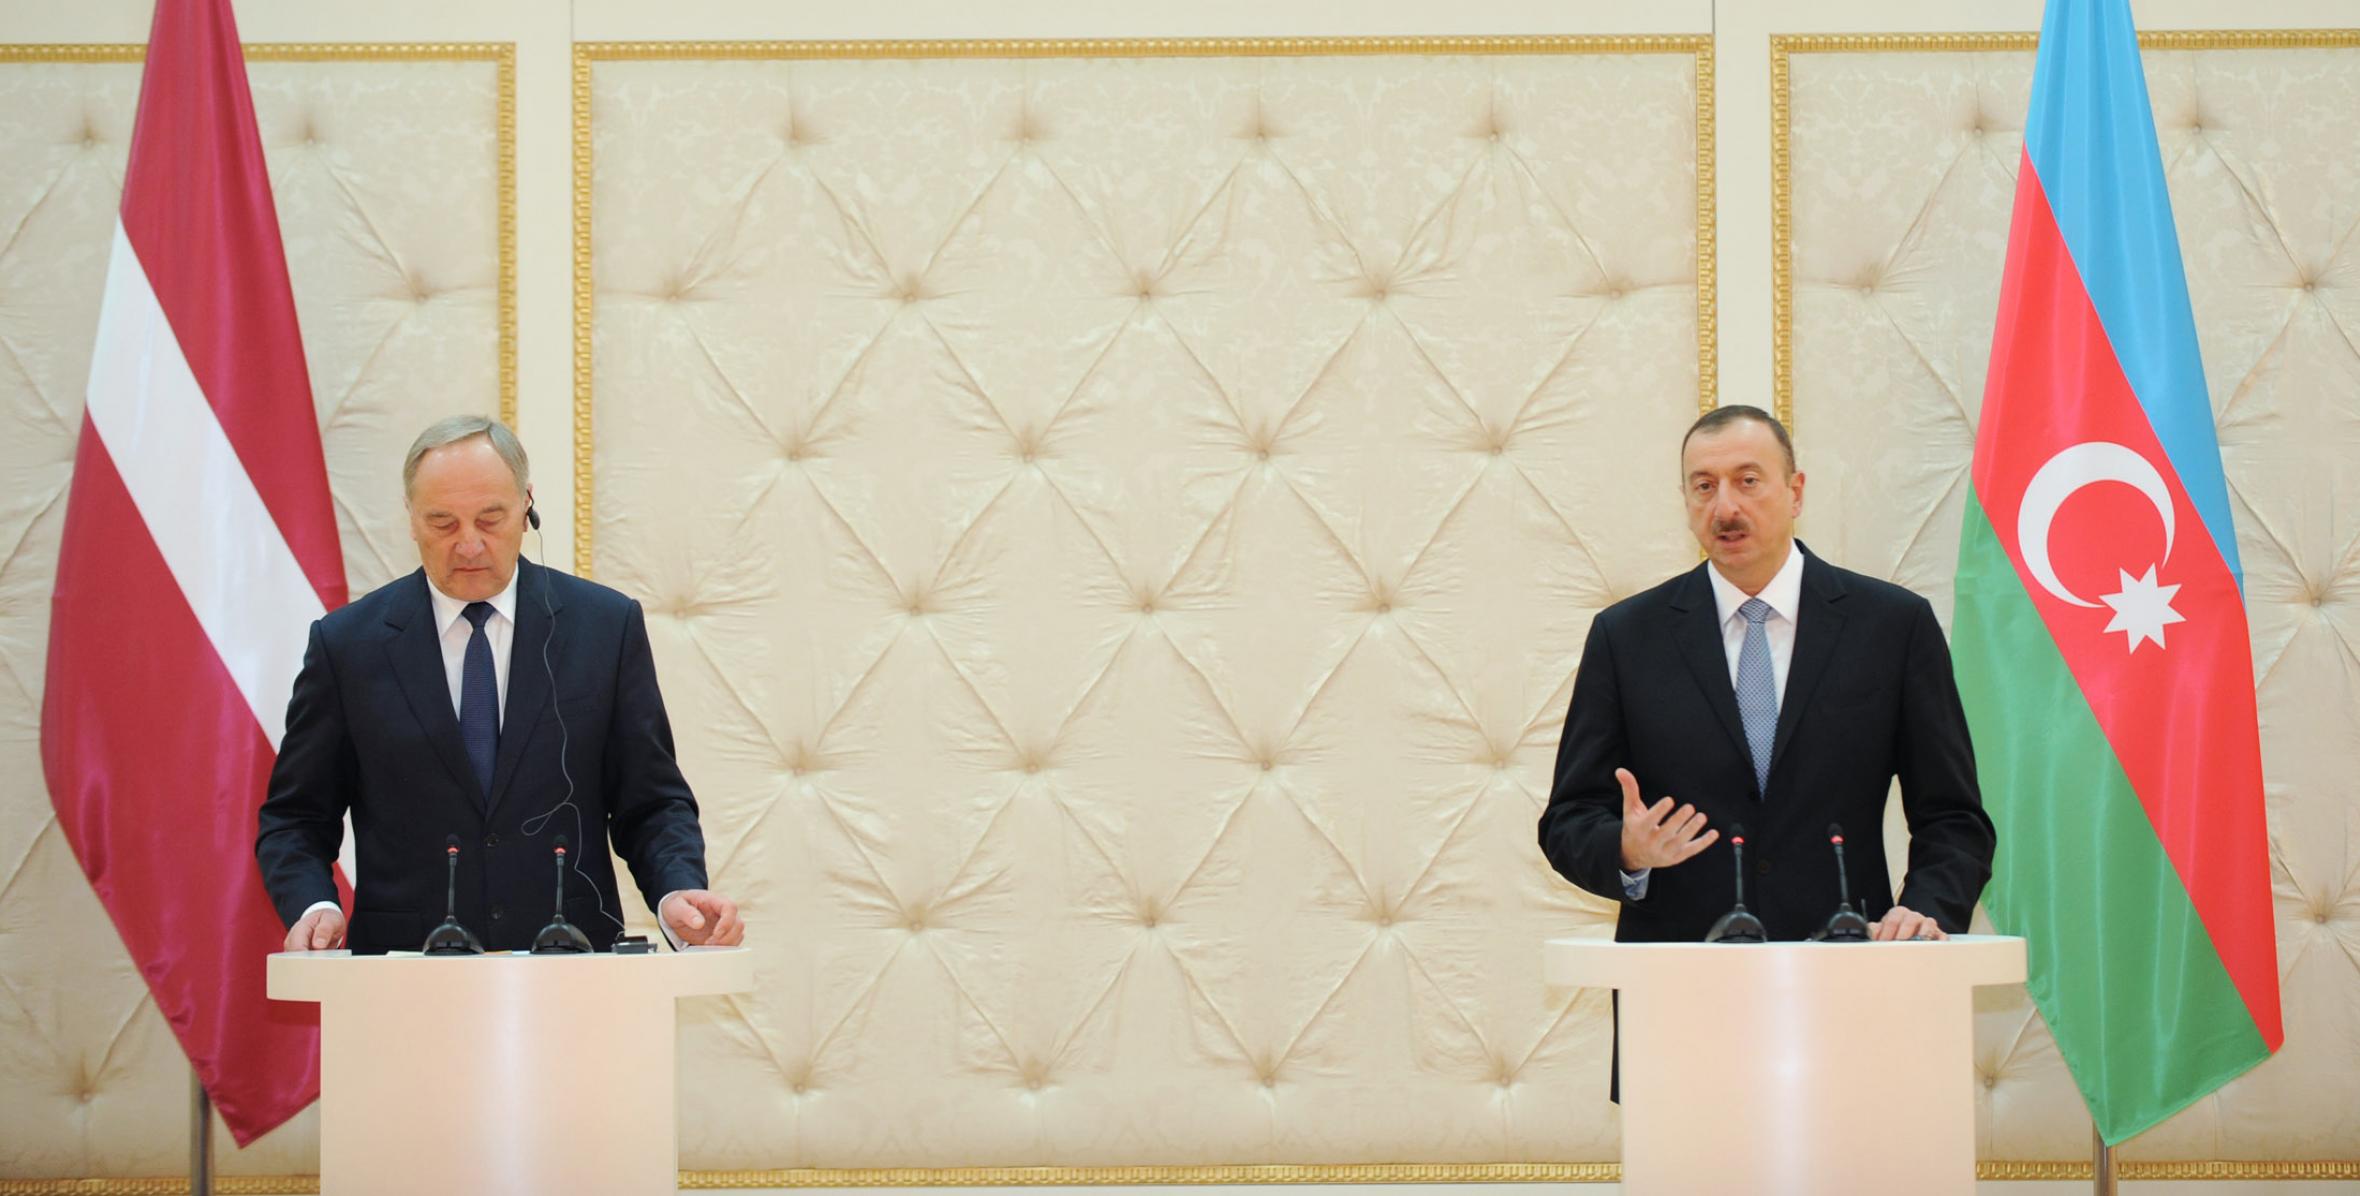 Press conference of Ilham Aliyev and President of the Republic of Latvia Andris Berzins was held